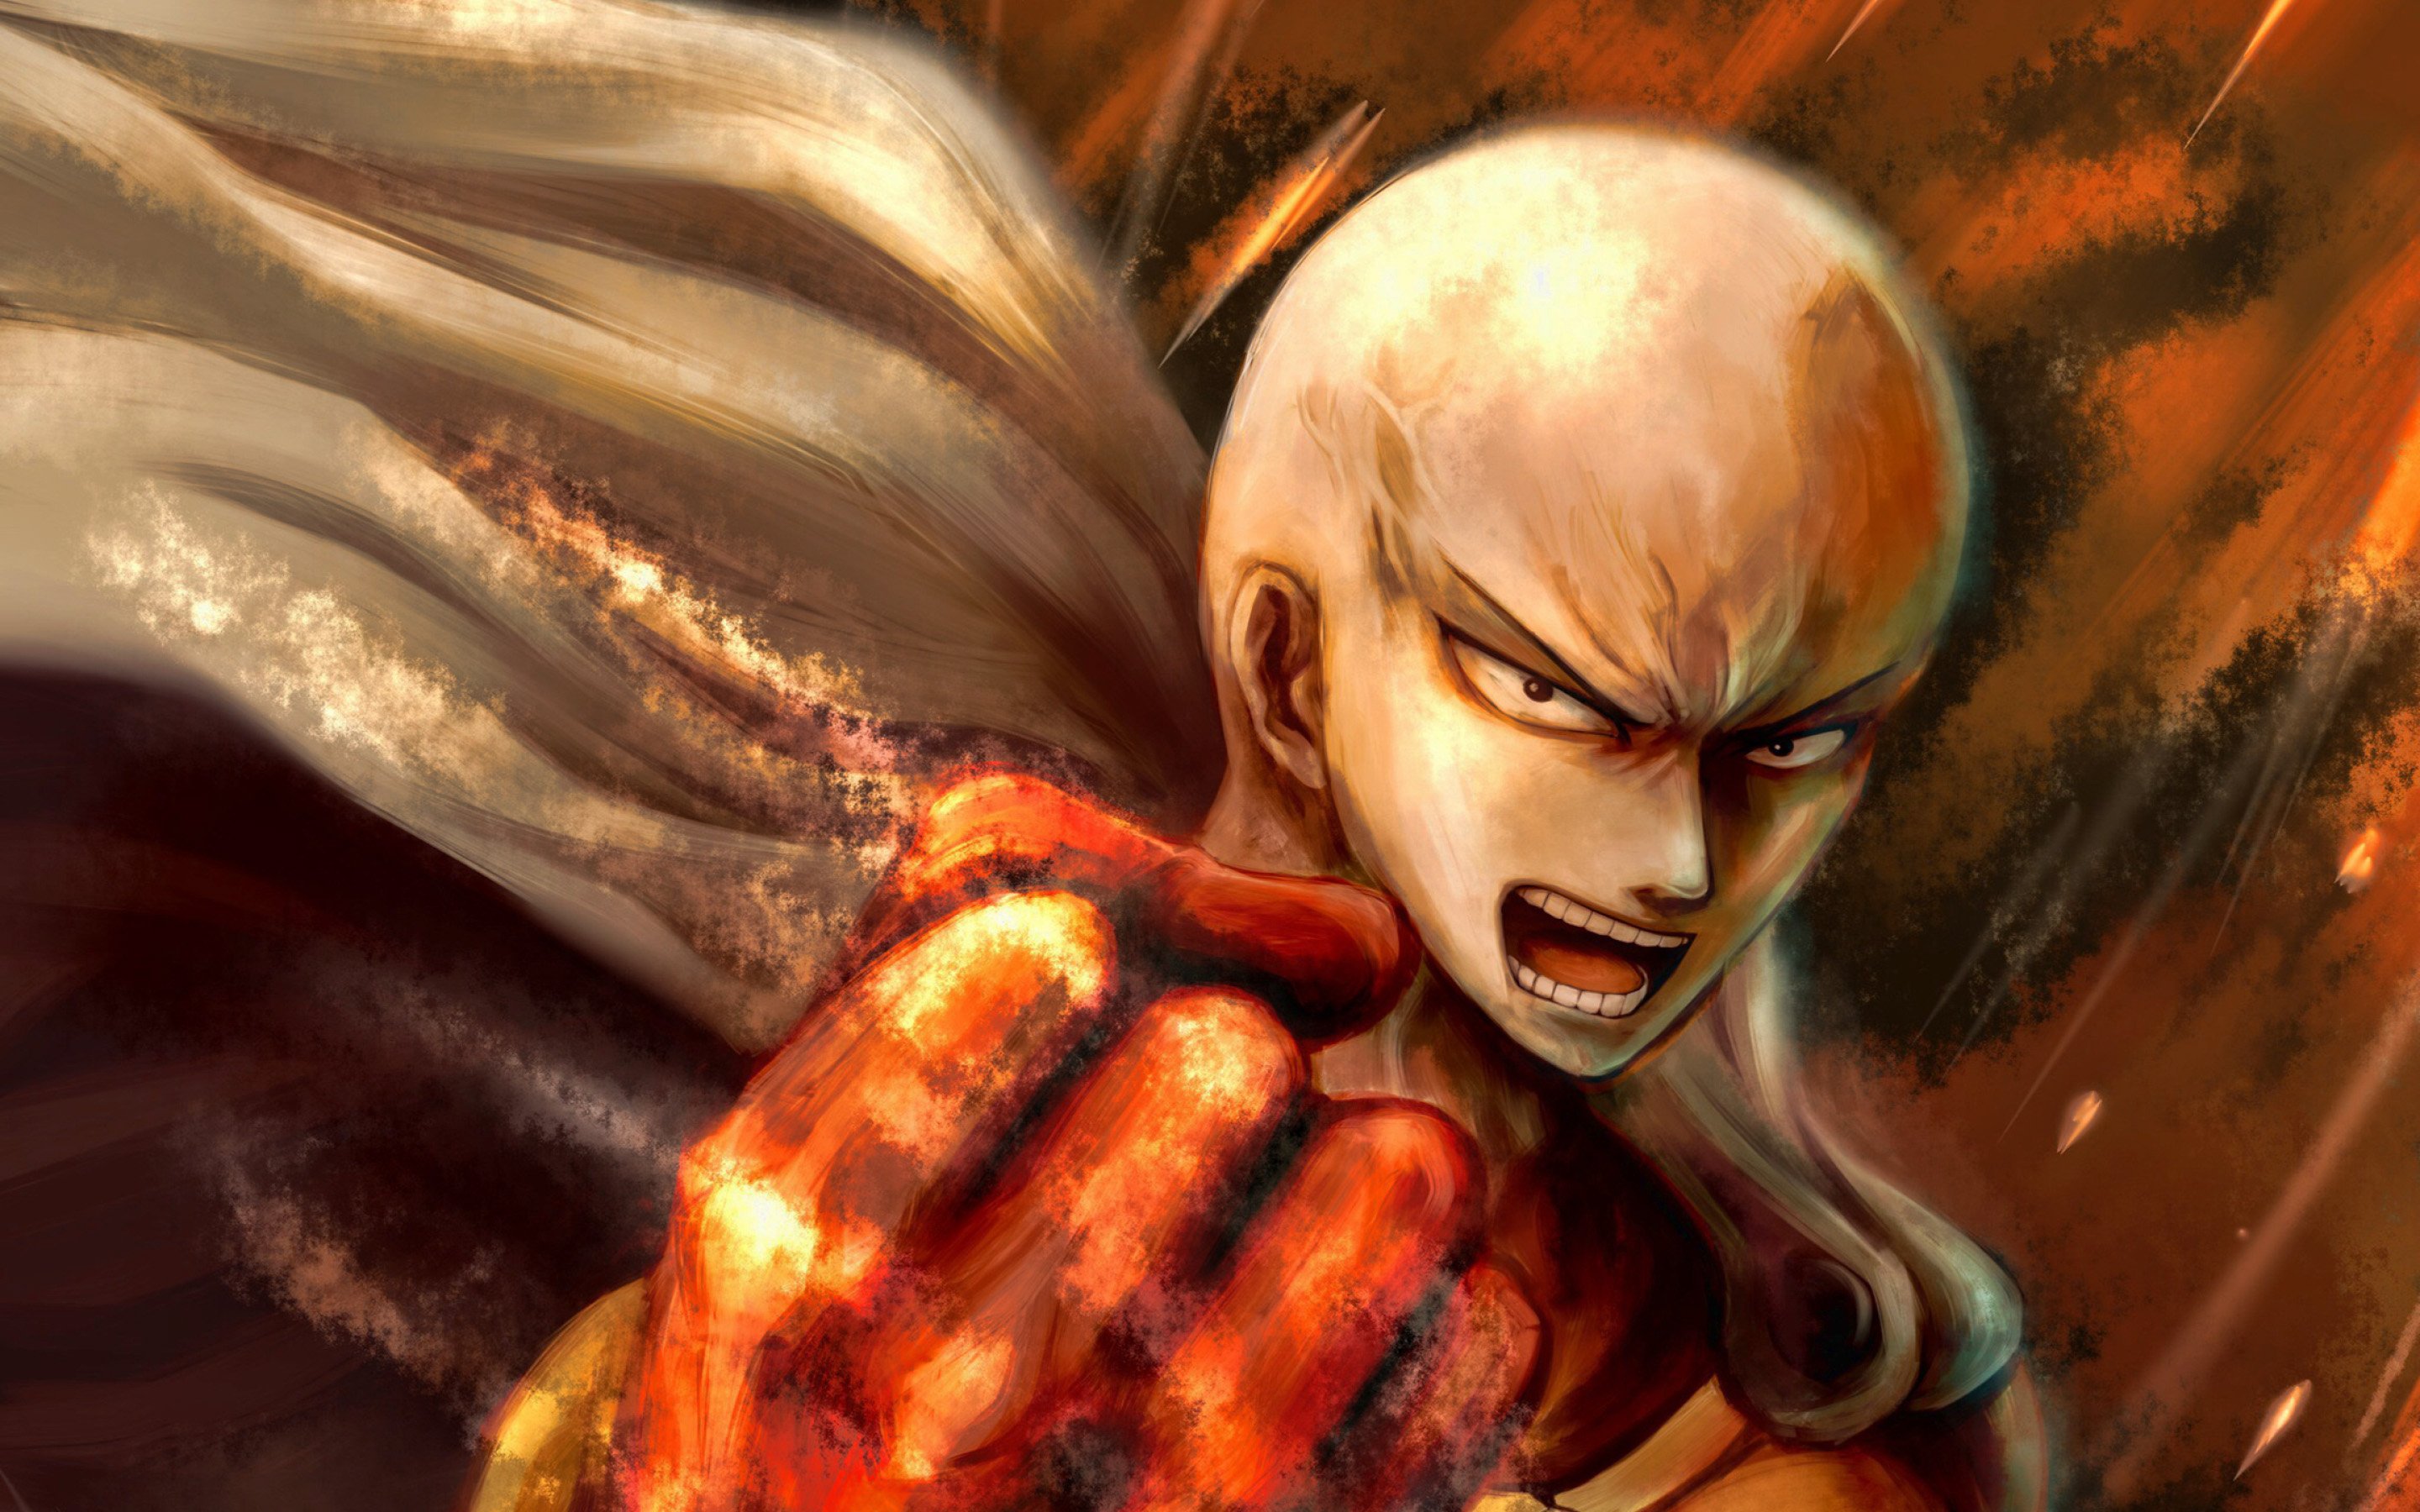 Download Wallpaper Saitama, Manga, Artwork, One Punch Man, Protagonist For Desktop With Resolution 2880x1800. High Quality HD Picture Wallpaper